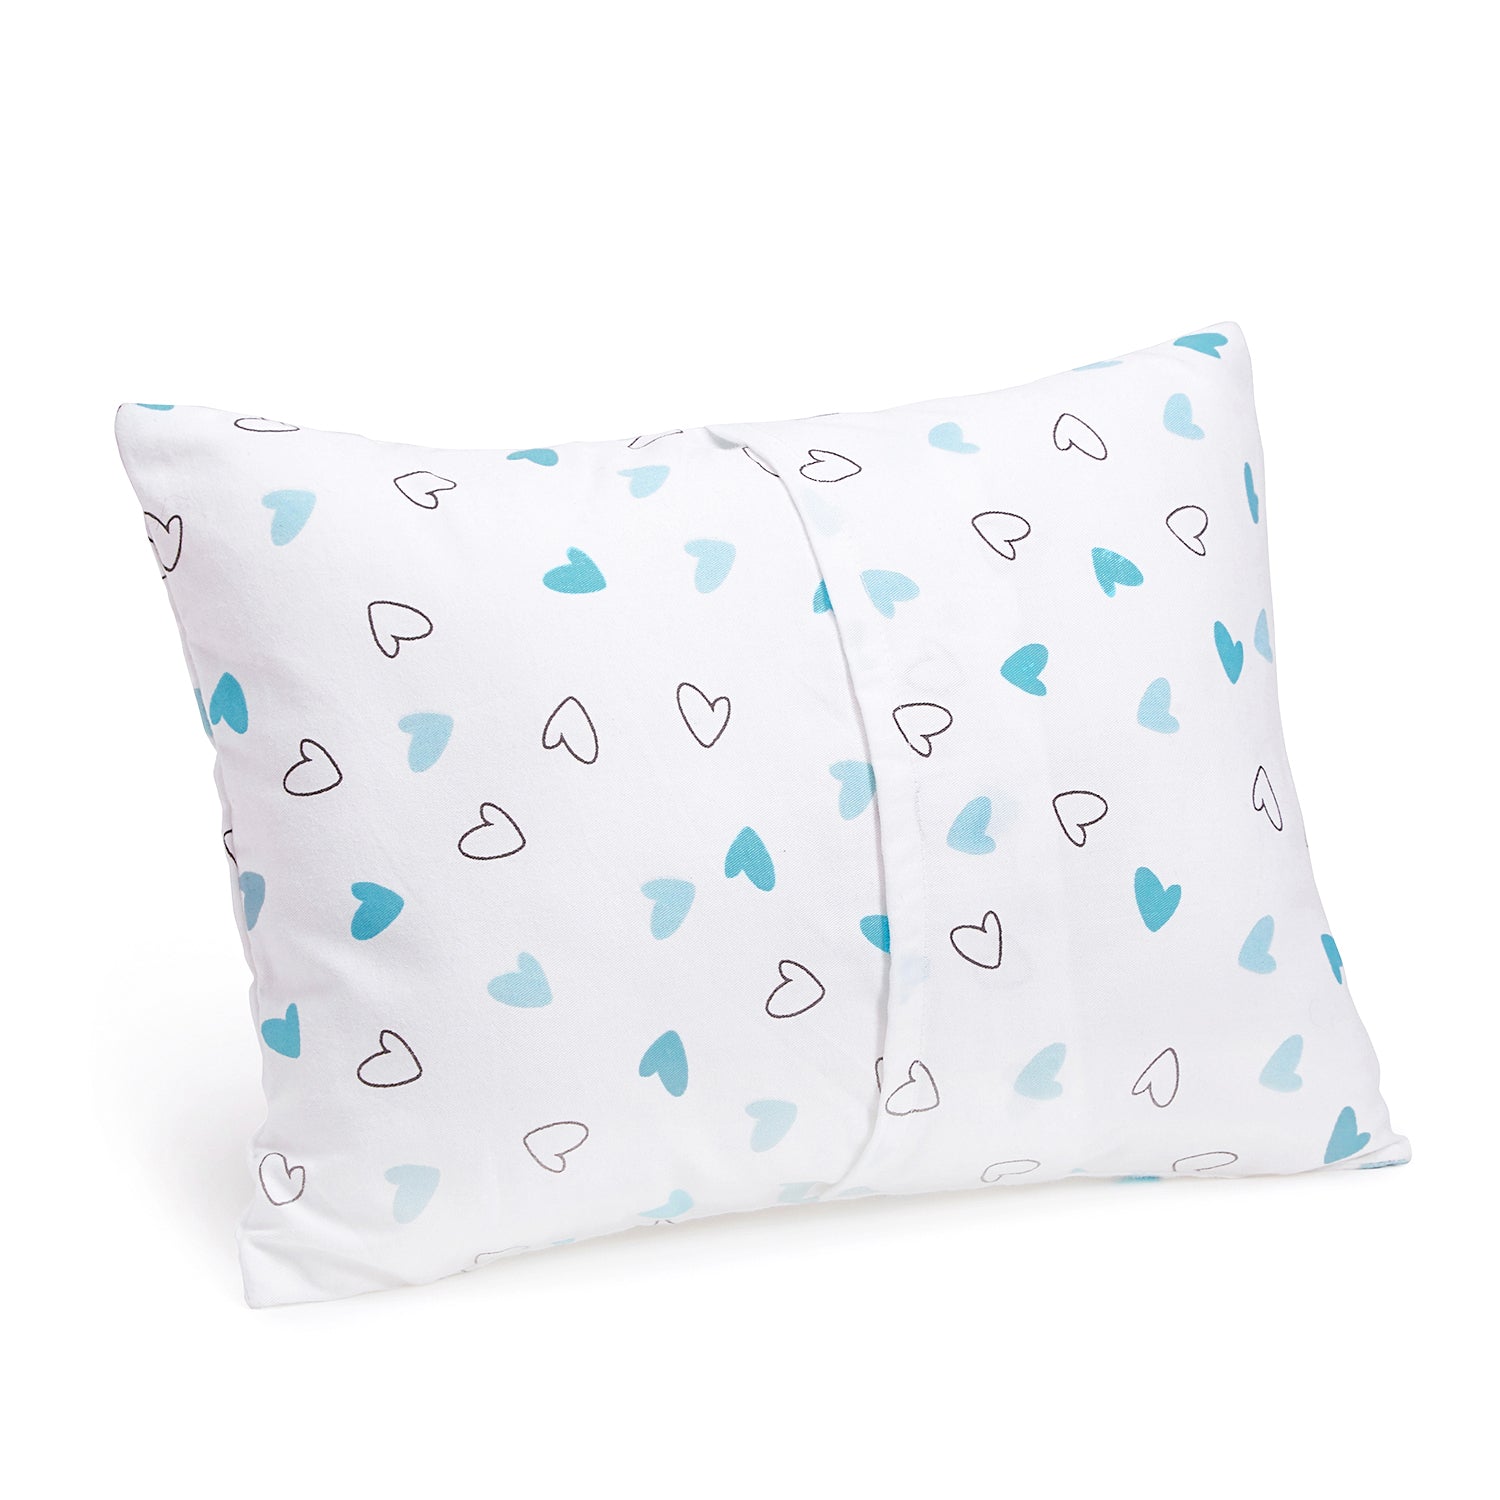 The White Cradle Cot Pillow + 2 Bolsters Set with Fillers - Blue Hearts